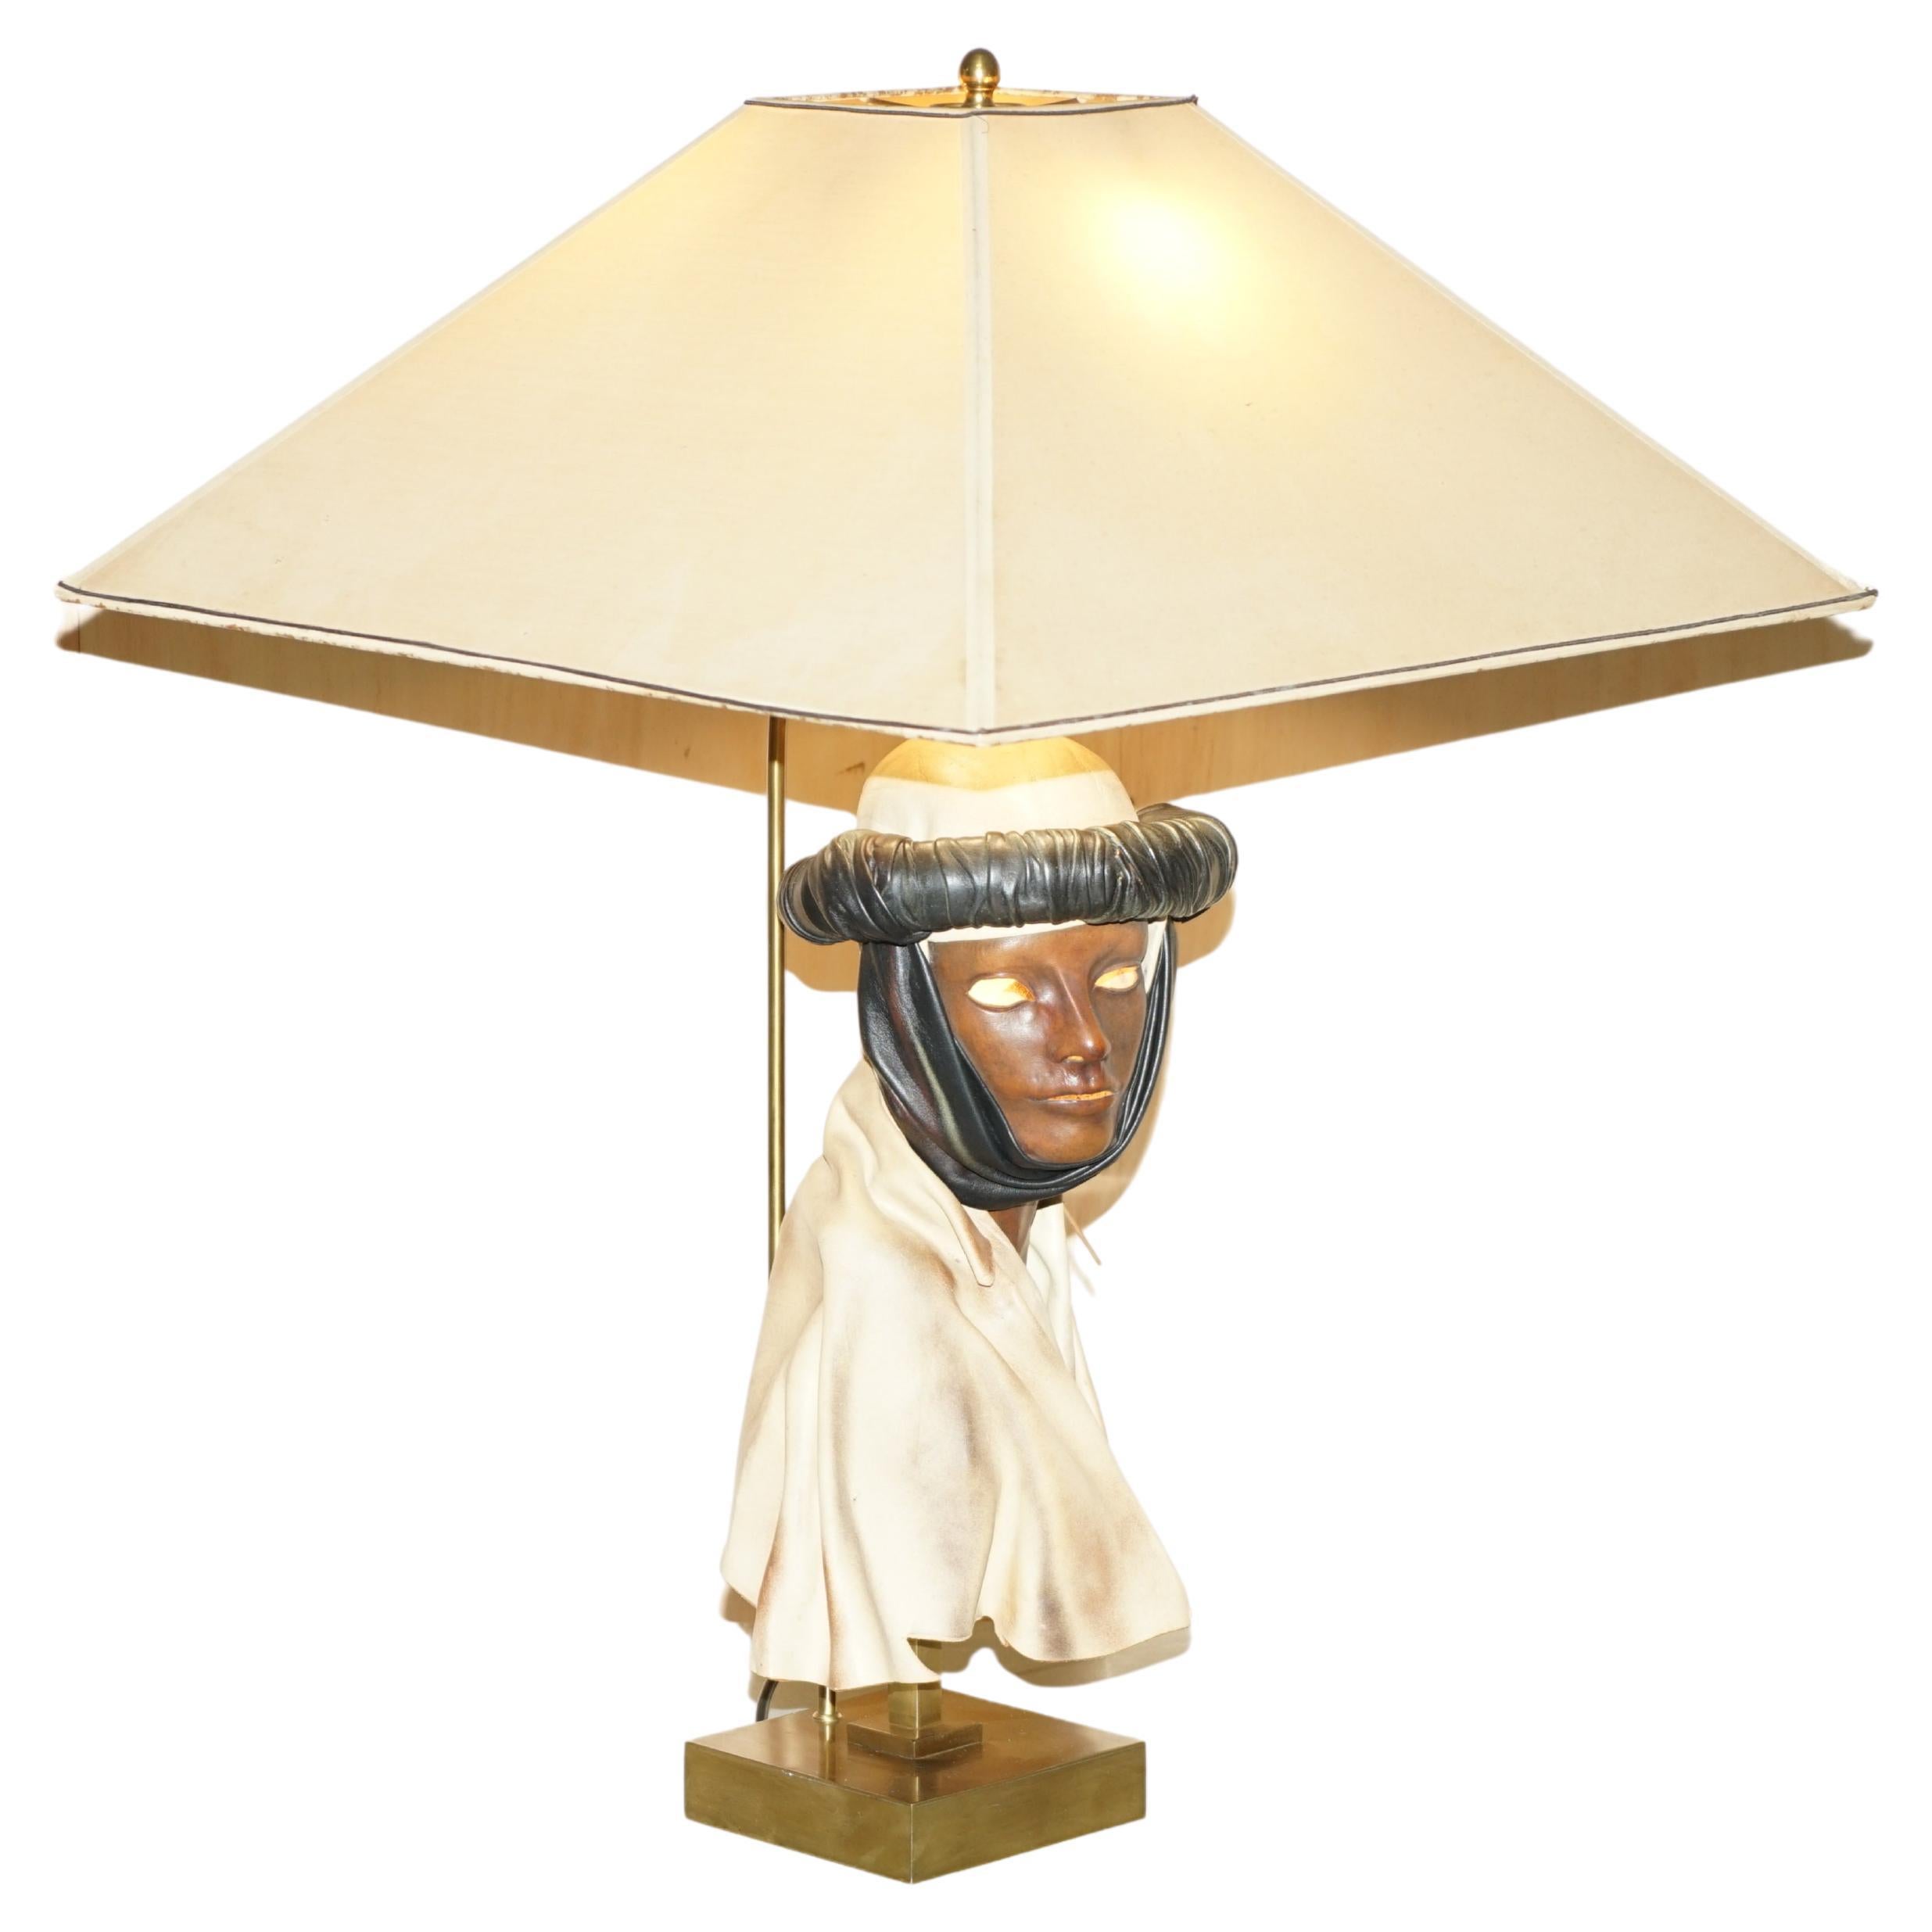 Midcentury Arabian Face Lamp Signed Pourbaix circa 1960s Must See Pictures For Sale